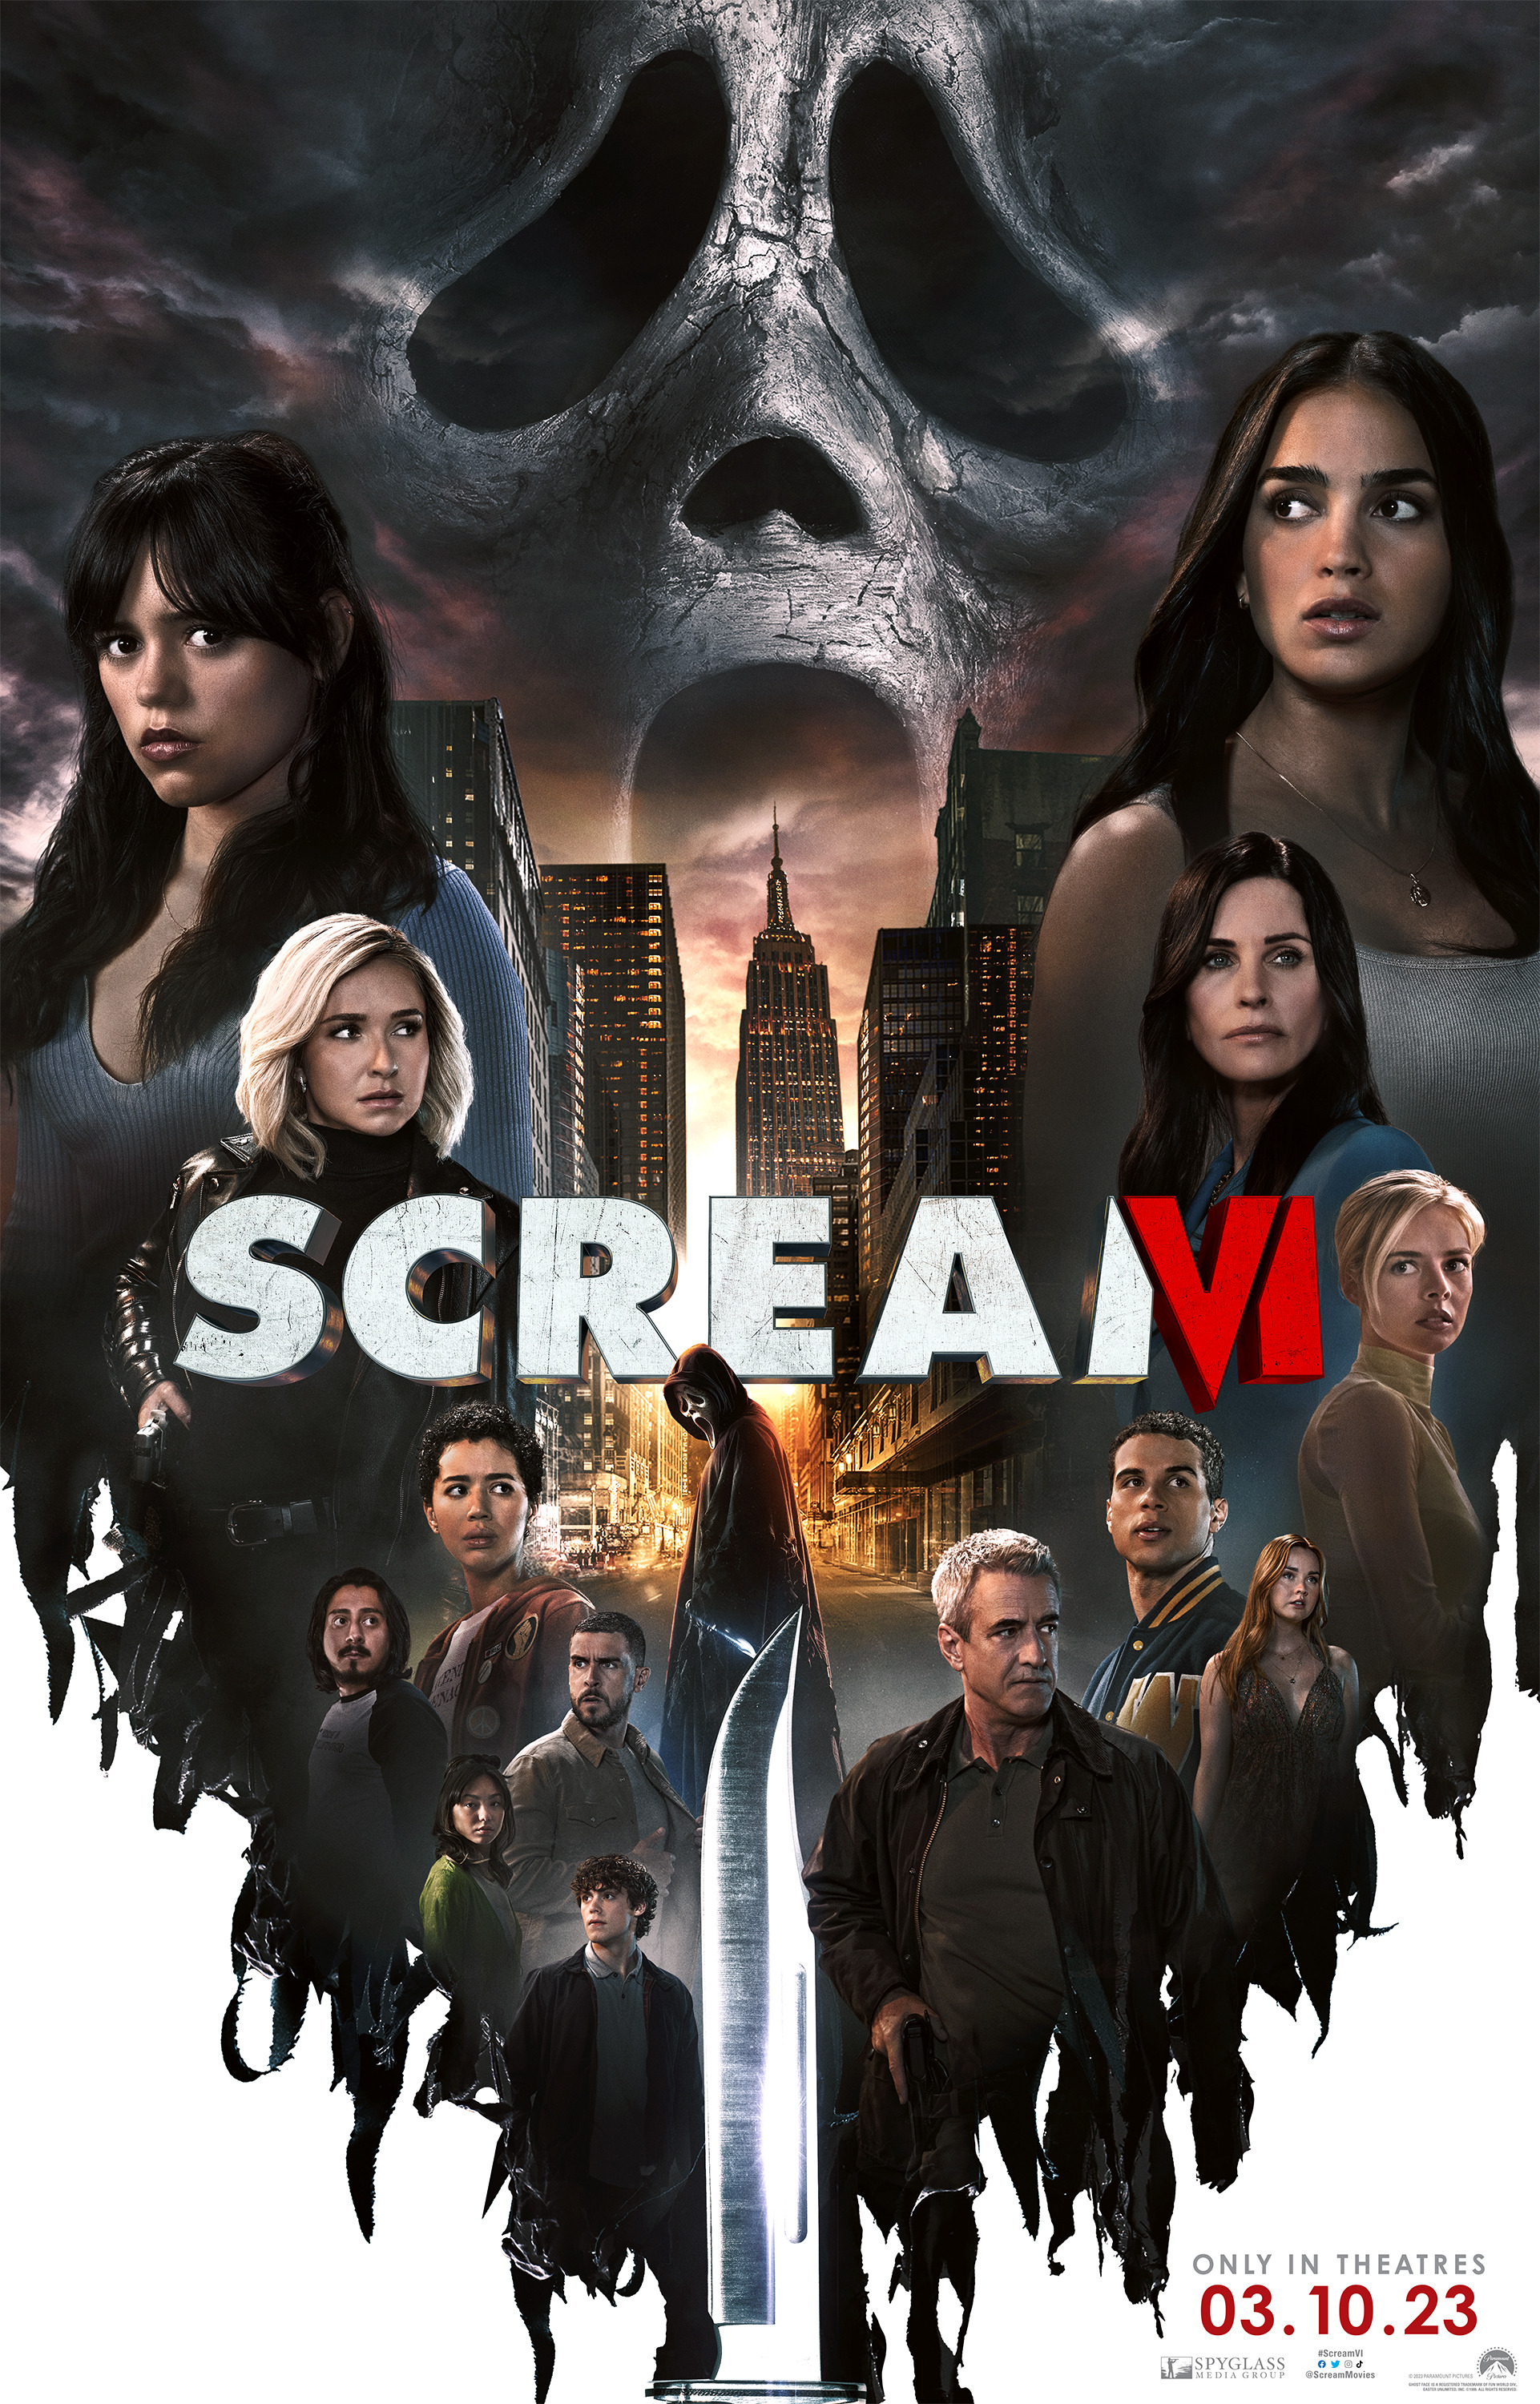 Scream VI' Spoiler Review: Who Knew Breaking The Rules Could Be So